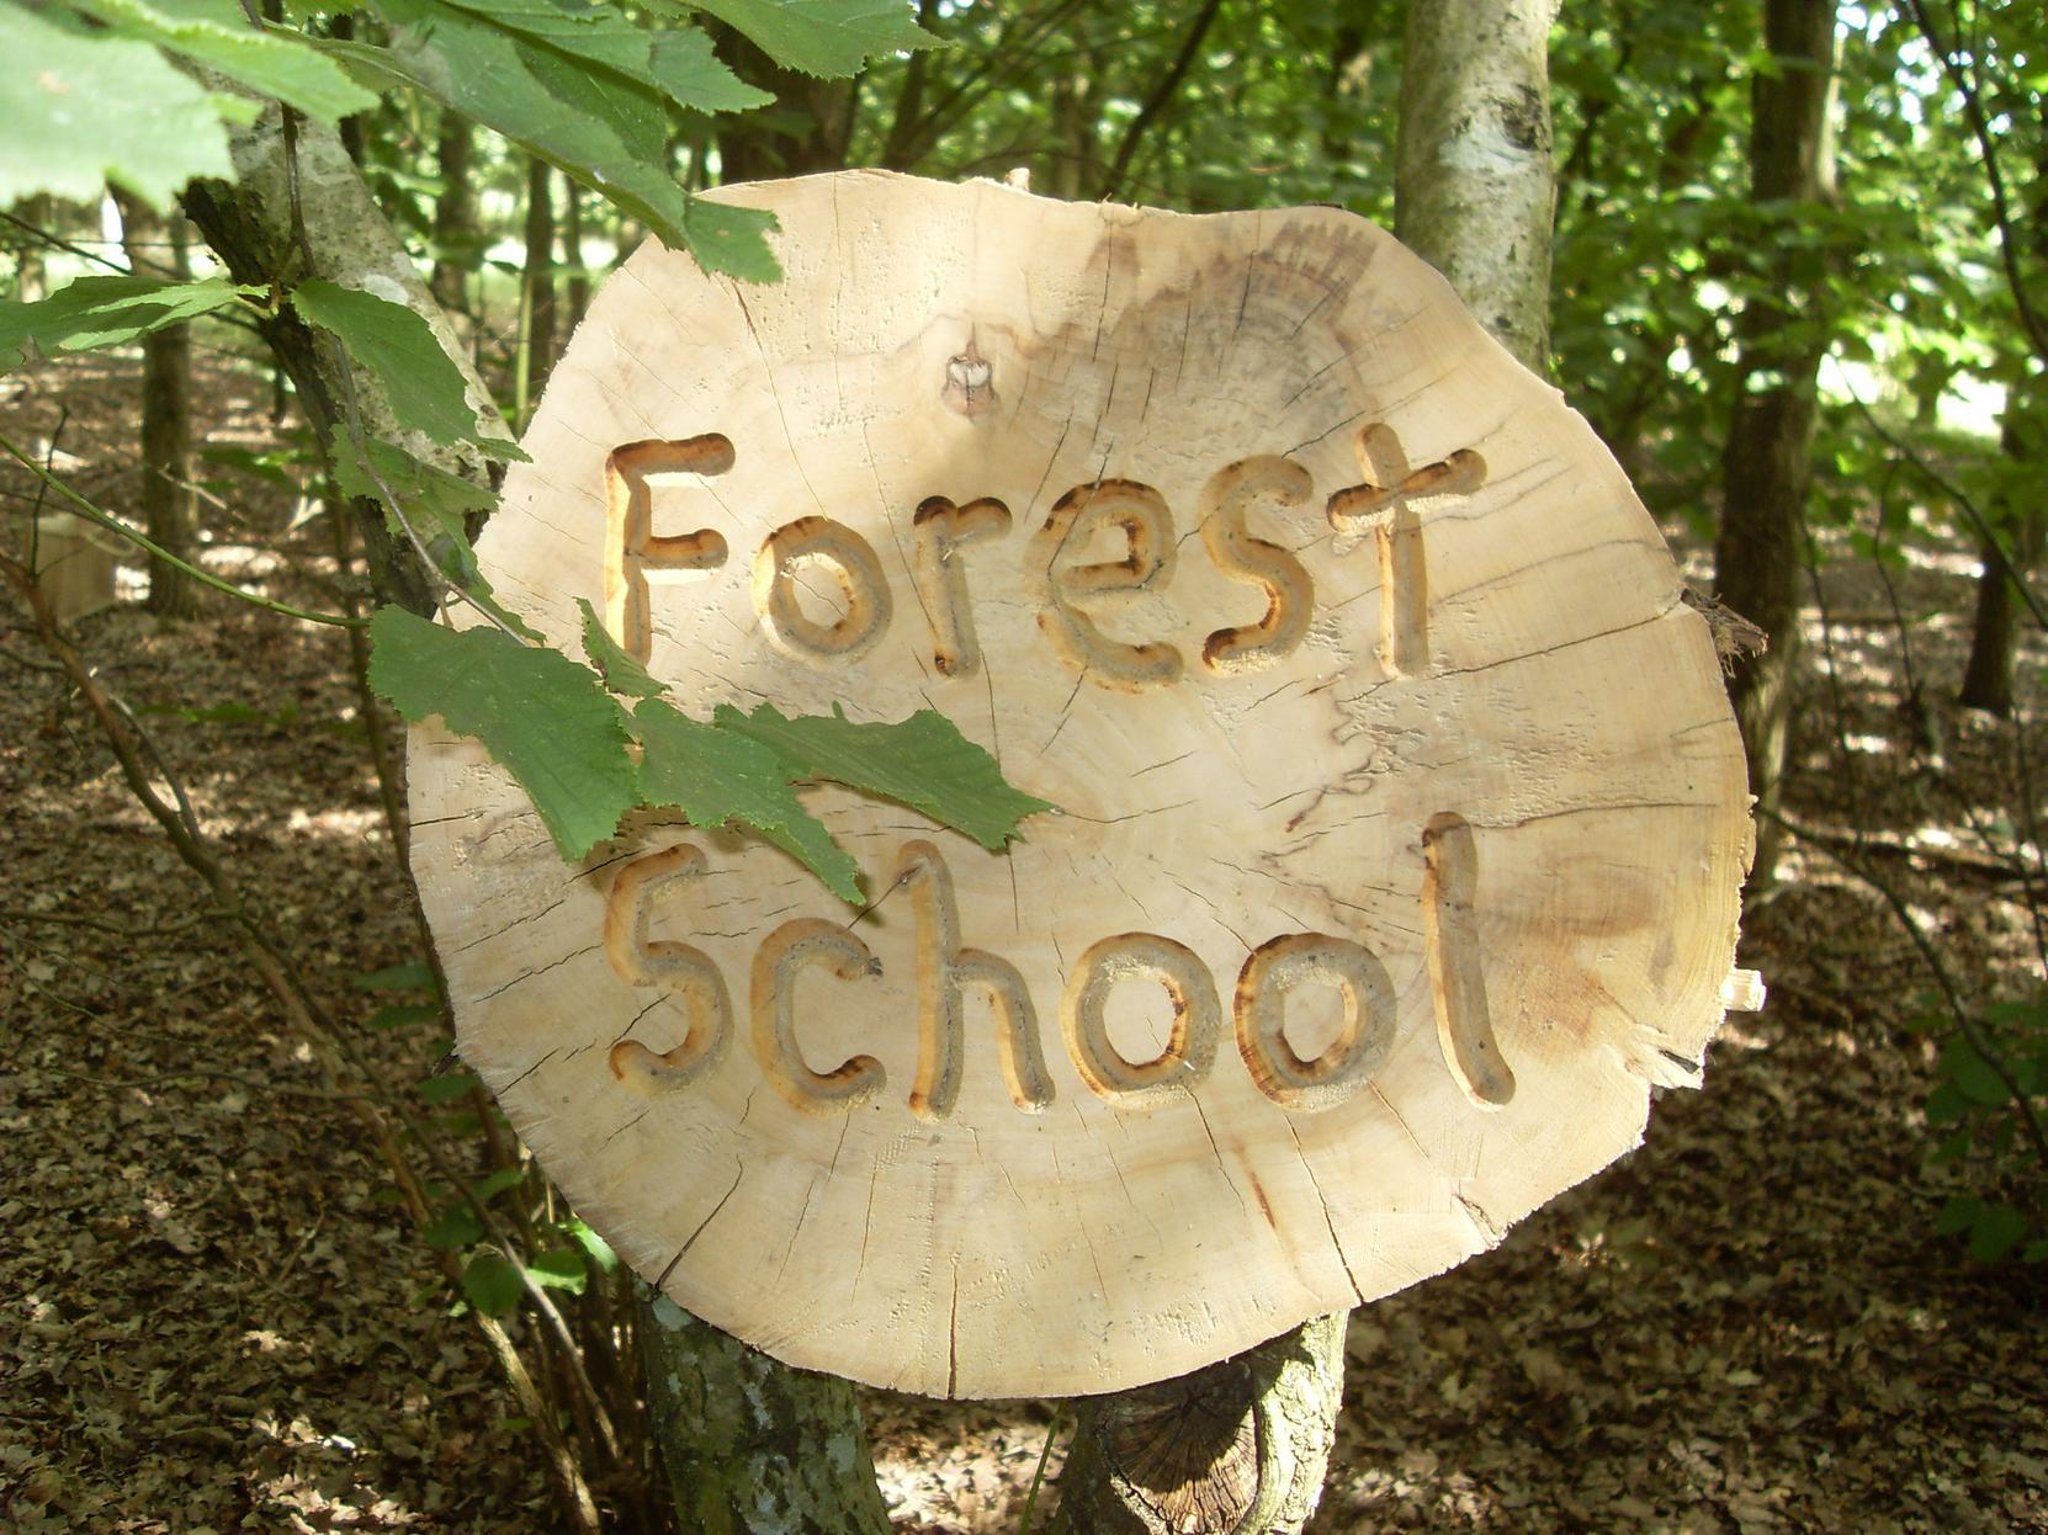 Forest school back up and running with nature sessions in Bedfordshire |  Bedford Today